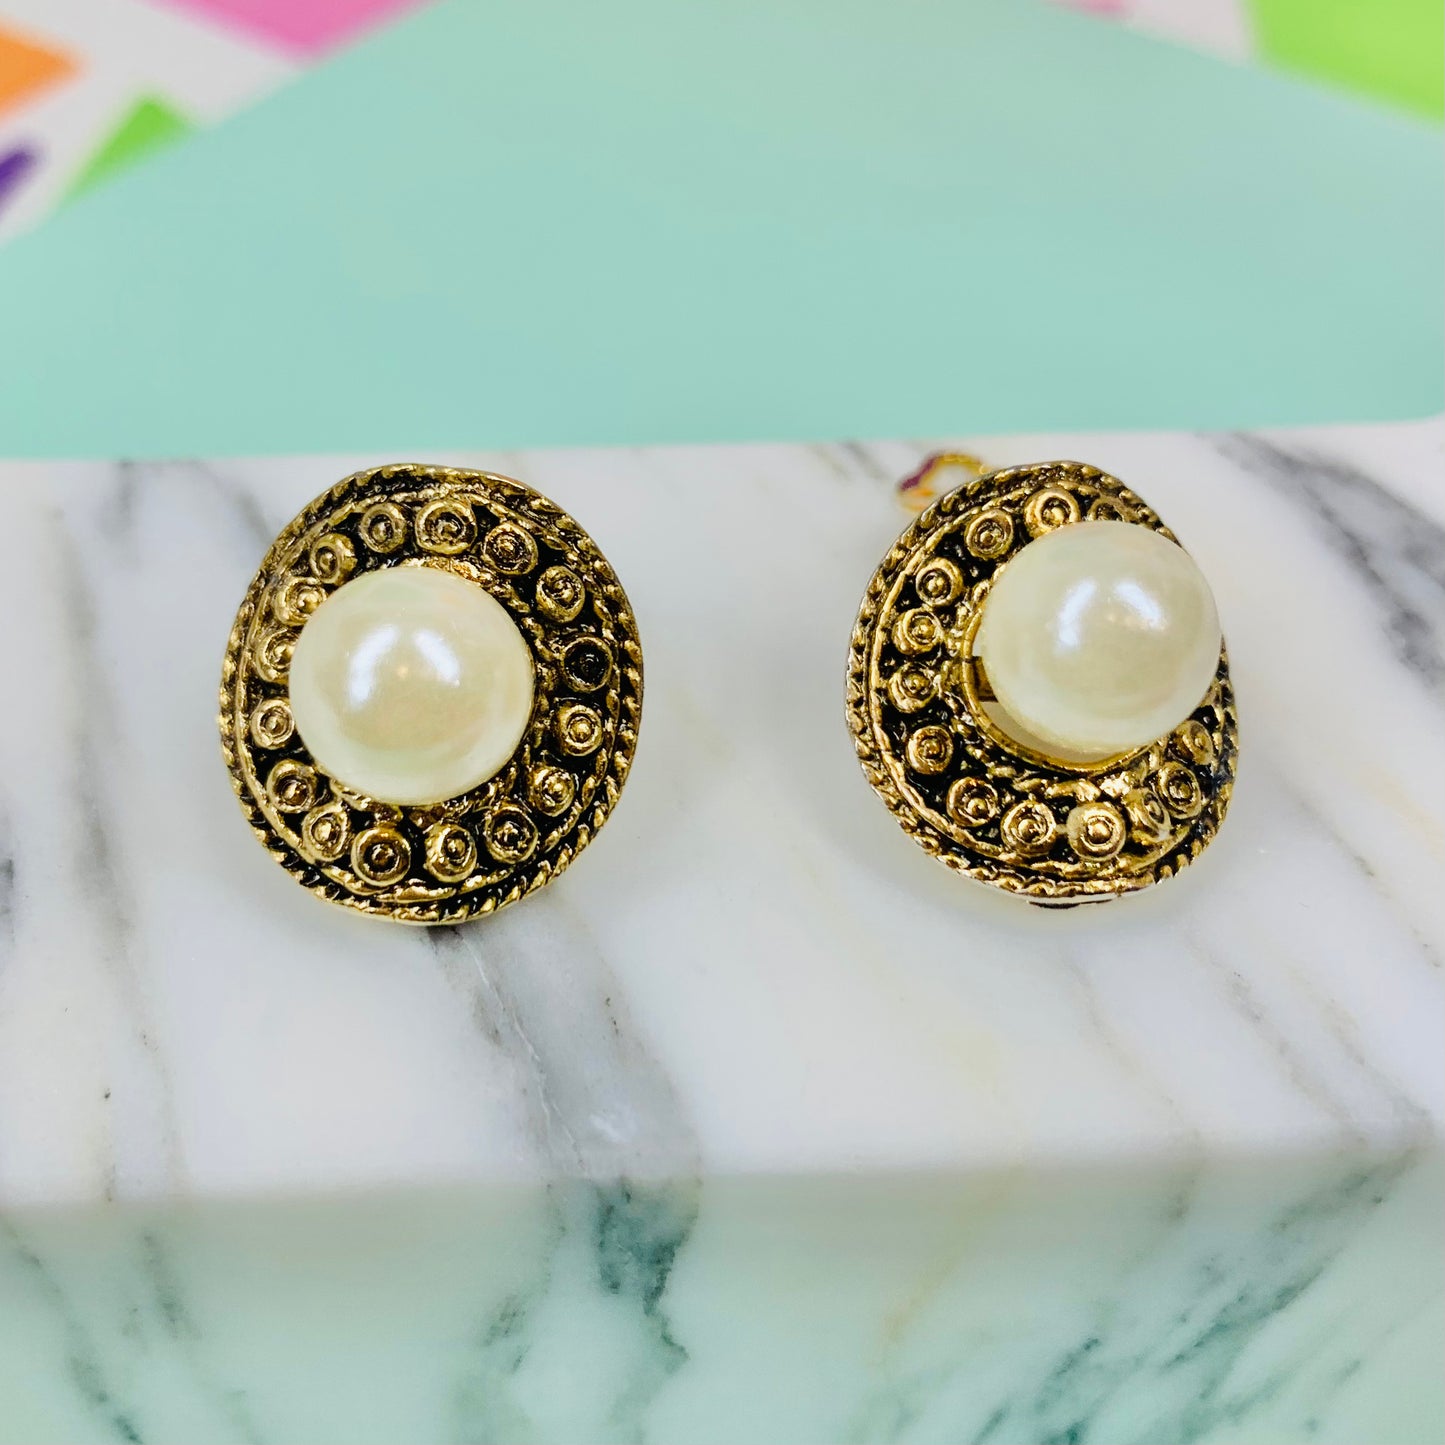 1960s gold plated filigree clip on pearl button earrings with filigree border